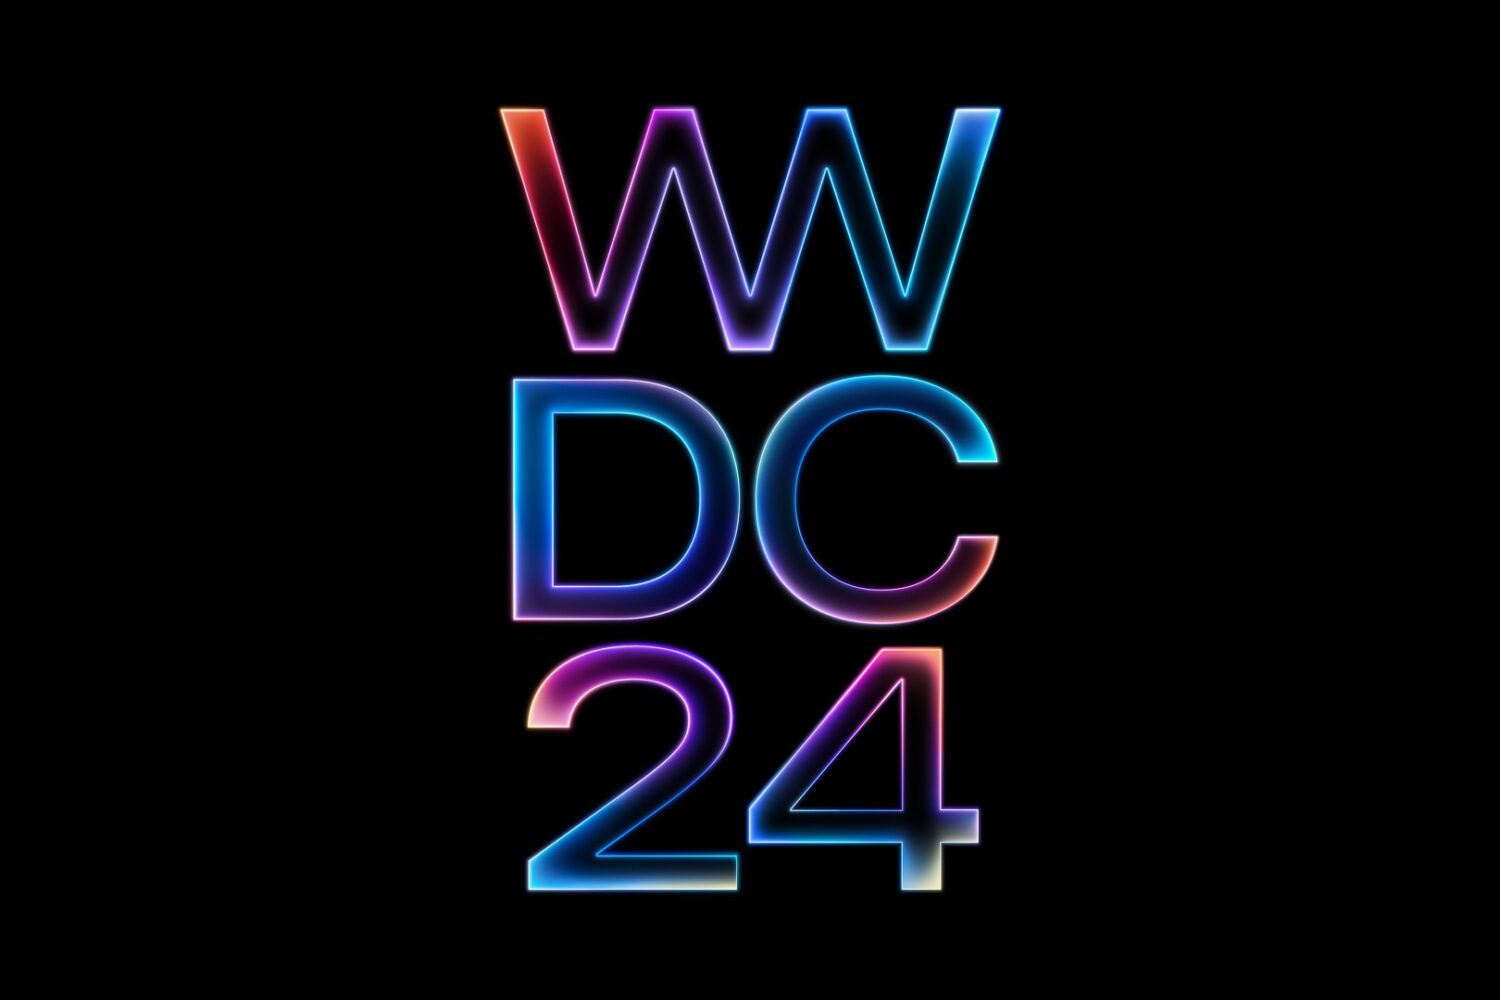 Huge colorful letters "WW" and "DC" in two lines, followed by the number 24, set against a solid black background